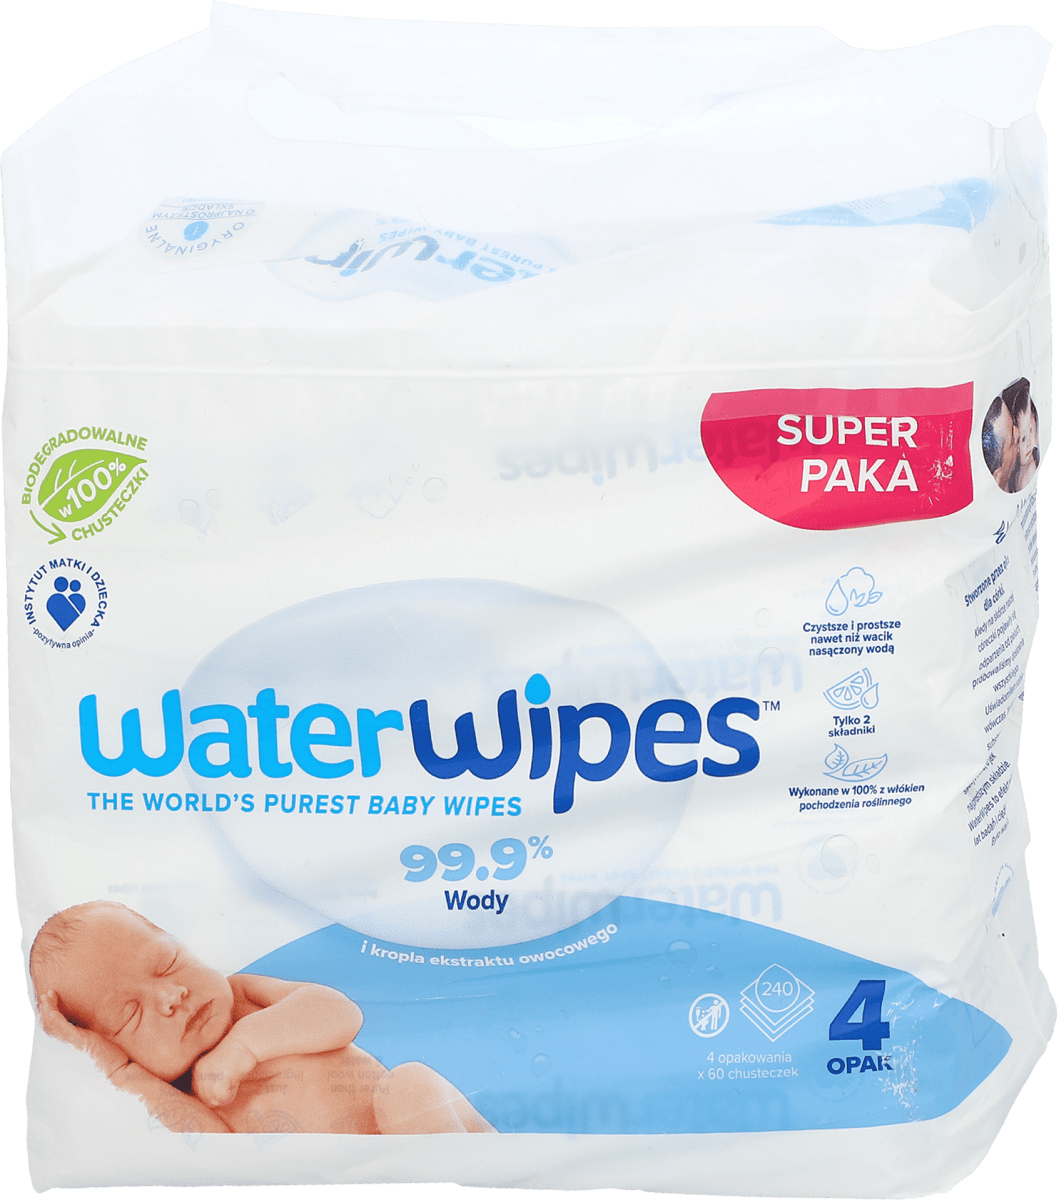 pampers active baby-dry pieluchy 4 maxi 8-14 kg 64 szt